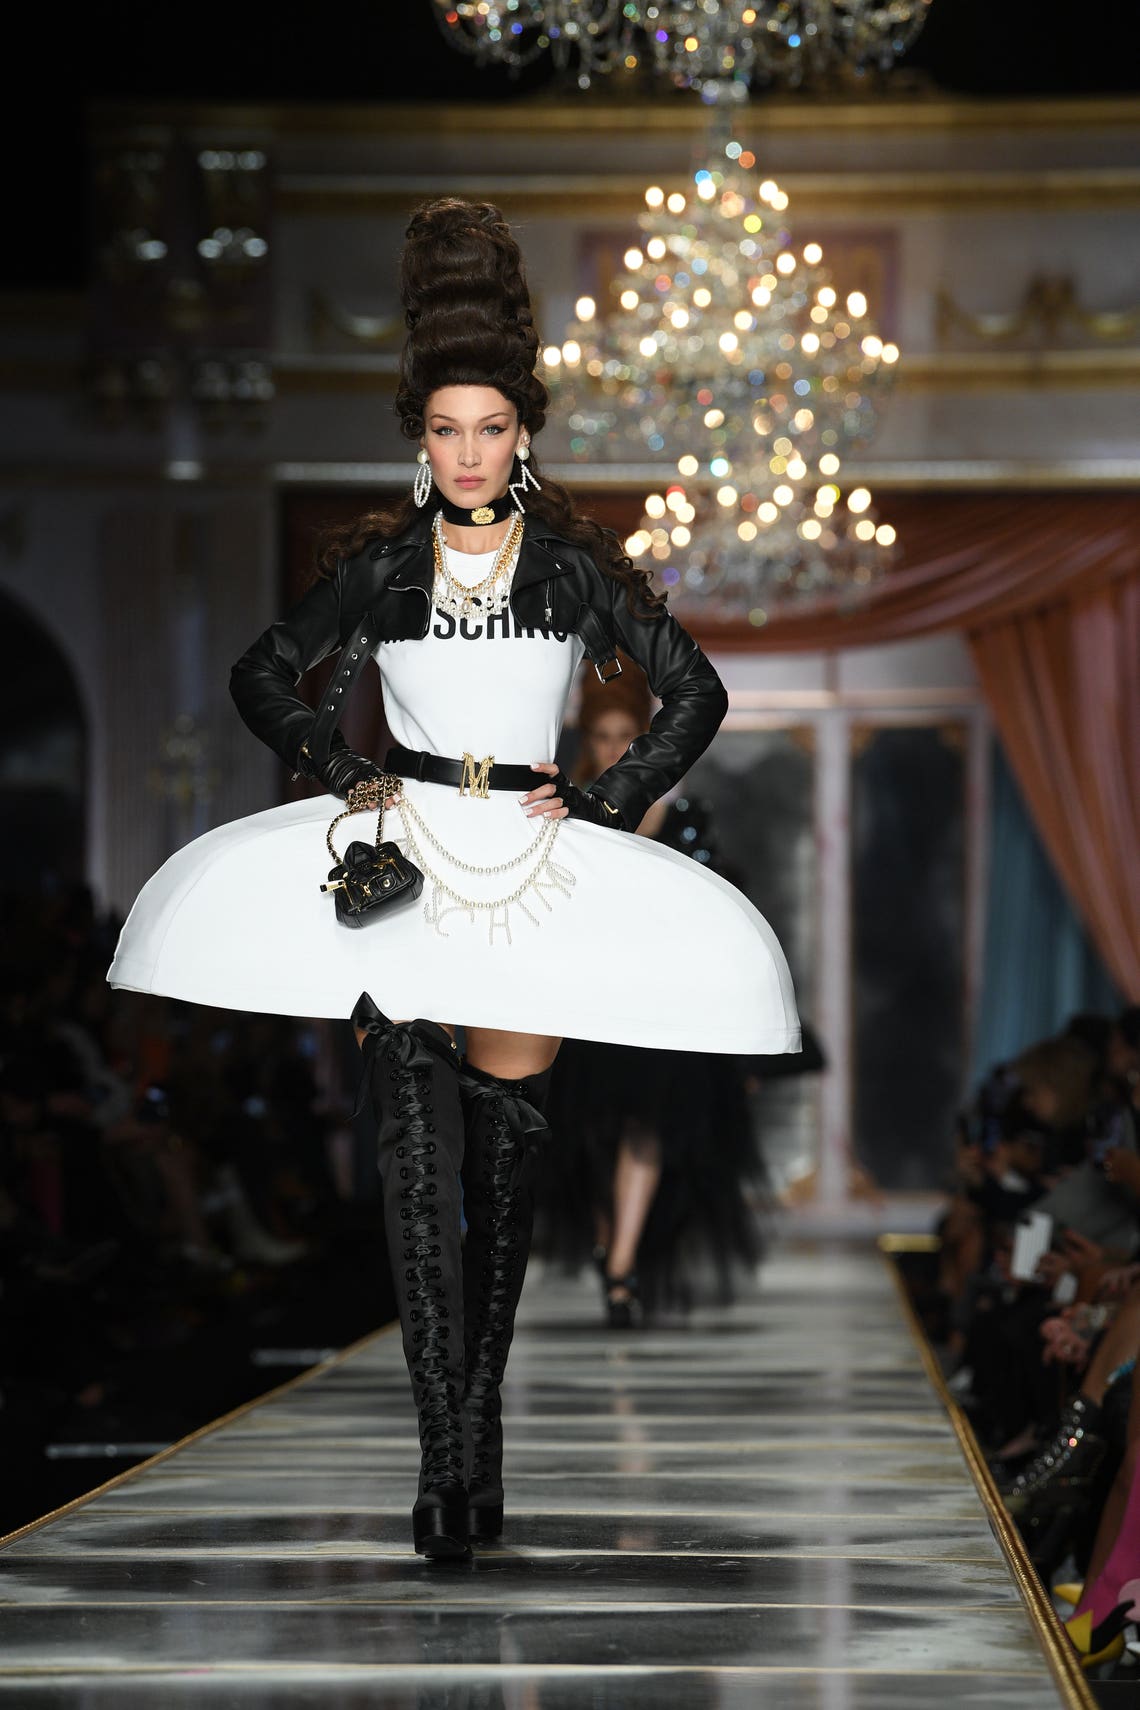 The Moschino Show at Milan Fashion Week Was a Fairy Tale Dream